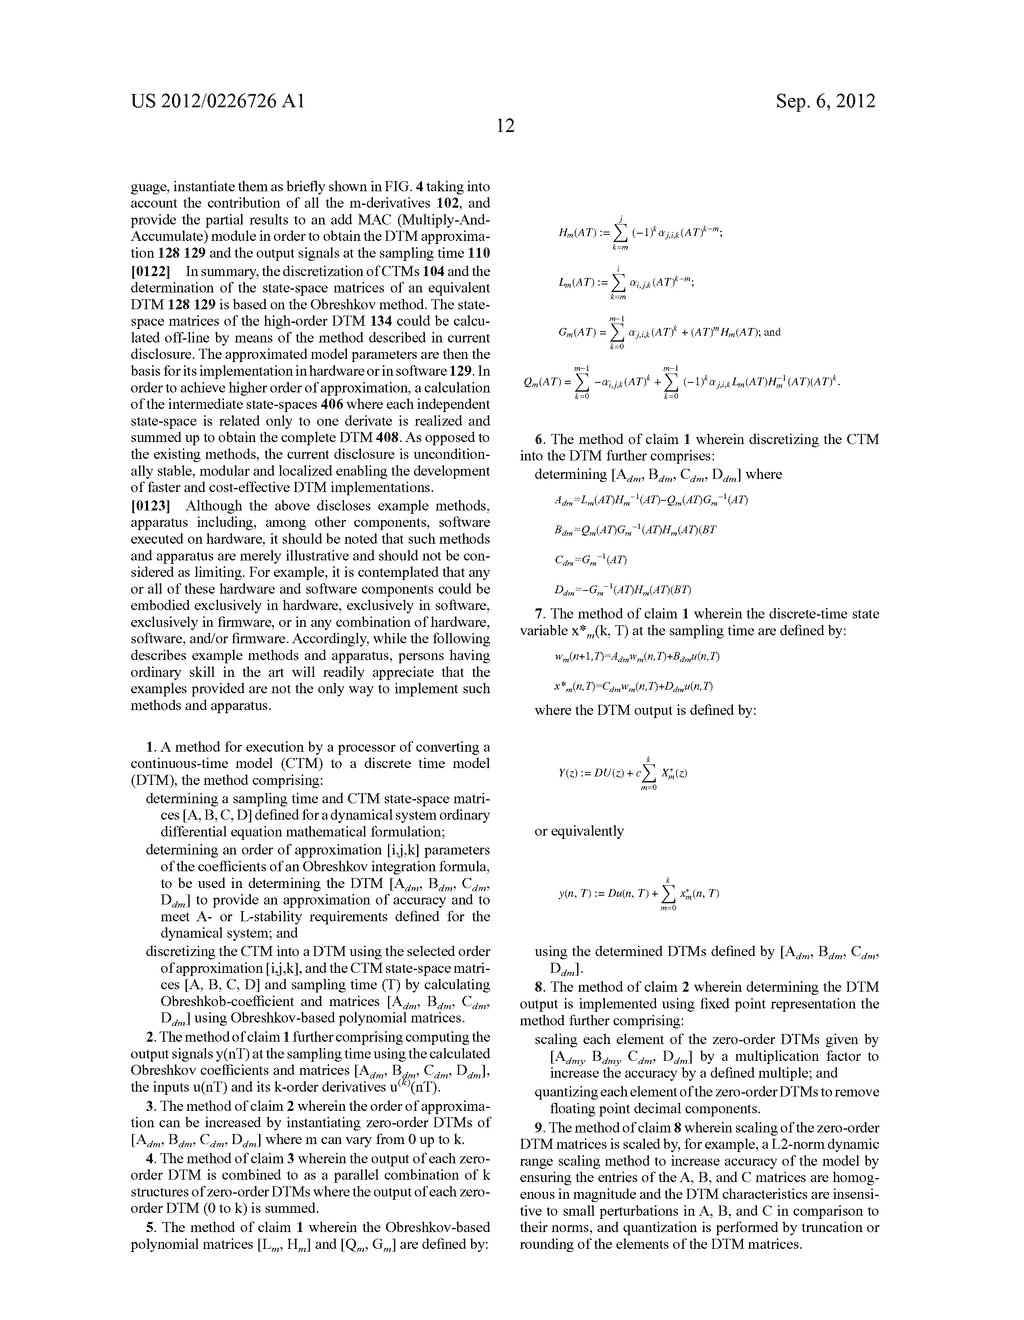 SYSTEM AND METHOD FOR GENERATING DISCRETE-TIME MODEL (DTM) OF     CONTINUOUS-TIME MODEL (CTM) FOR A DYNAMICAL SYSTEM - diagram, schematic, and image 36